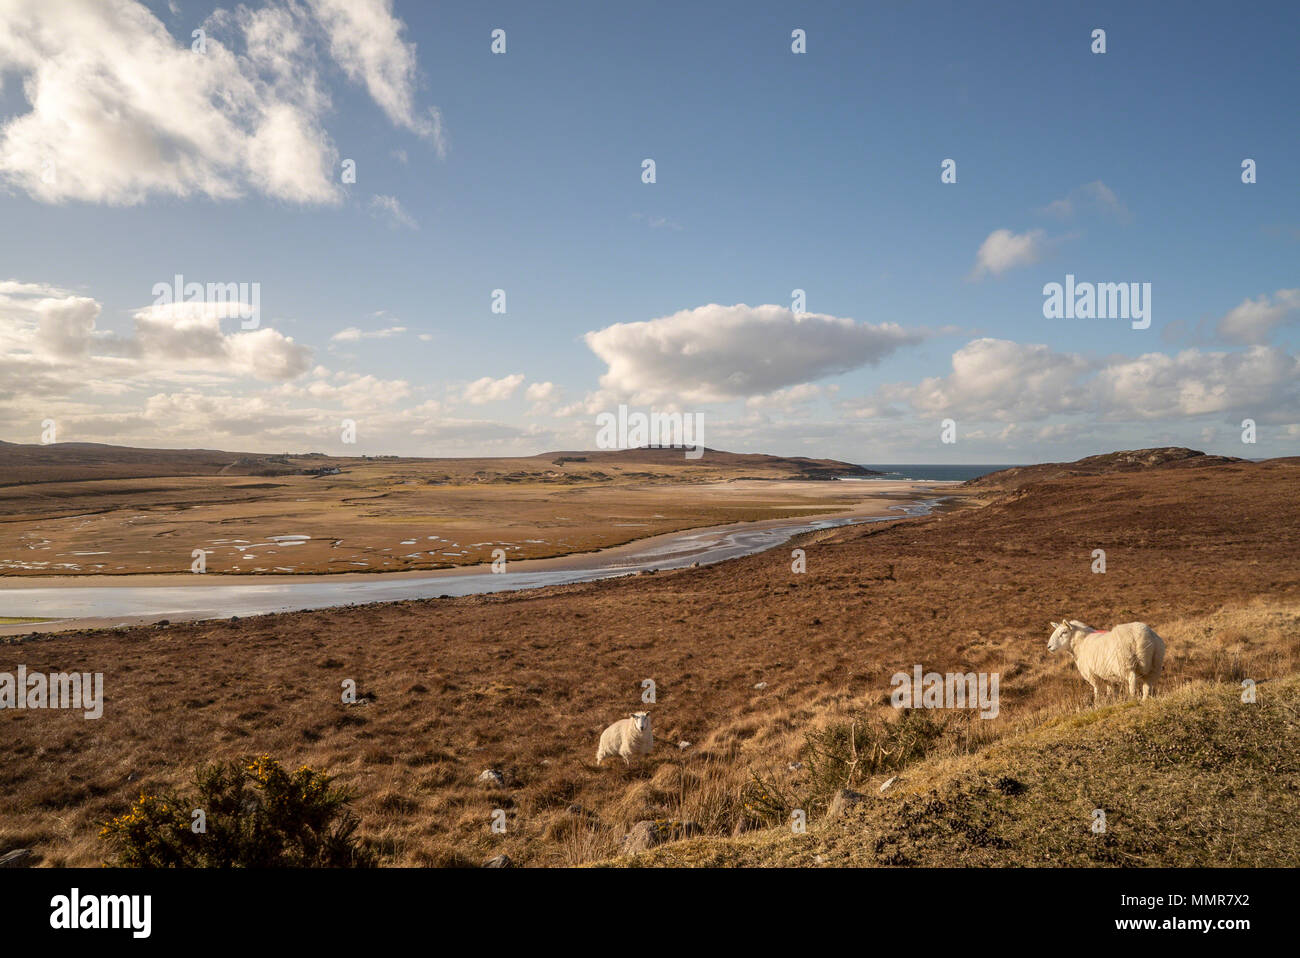 Achnahaird Beach and salt flats at low tide on the road to Achiltibuie in Springtime, Ross and Cromarty, Highland, Scotland. A couple of sheep standin Stock Photo